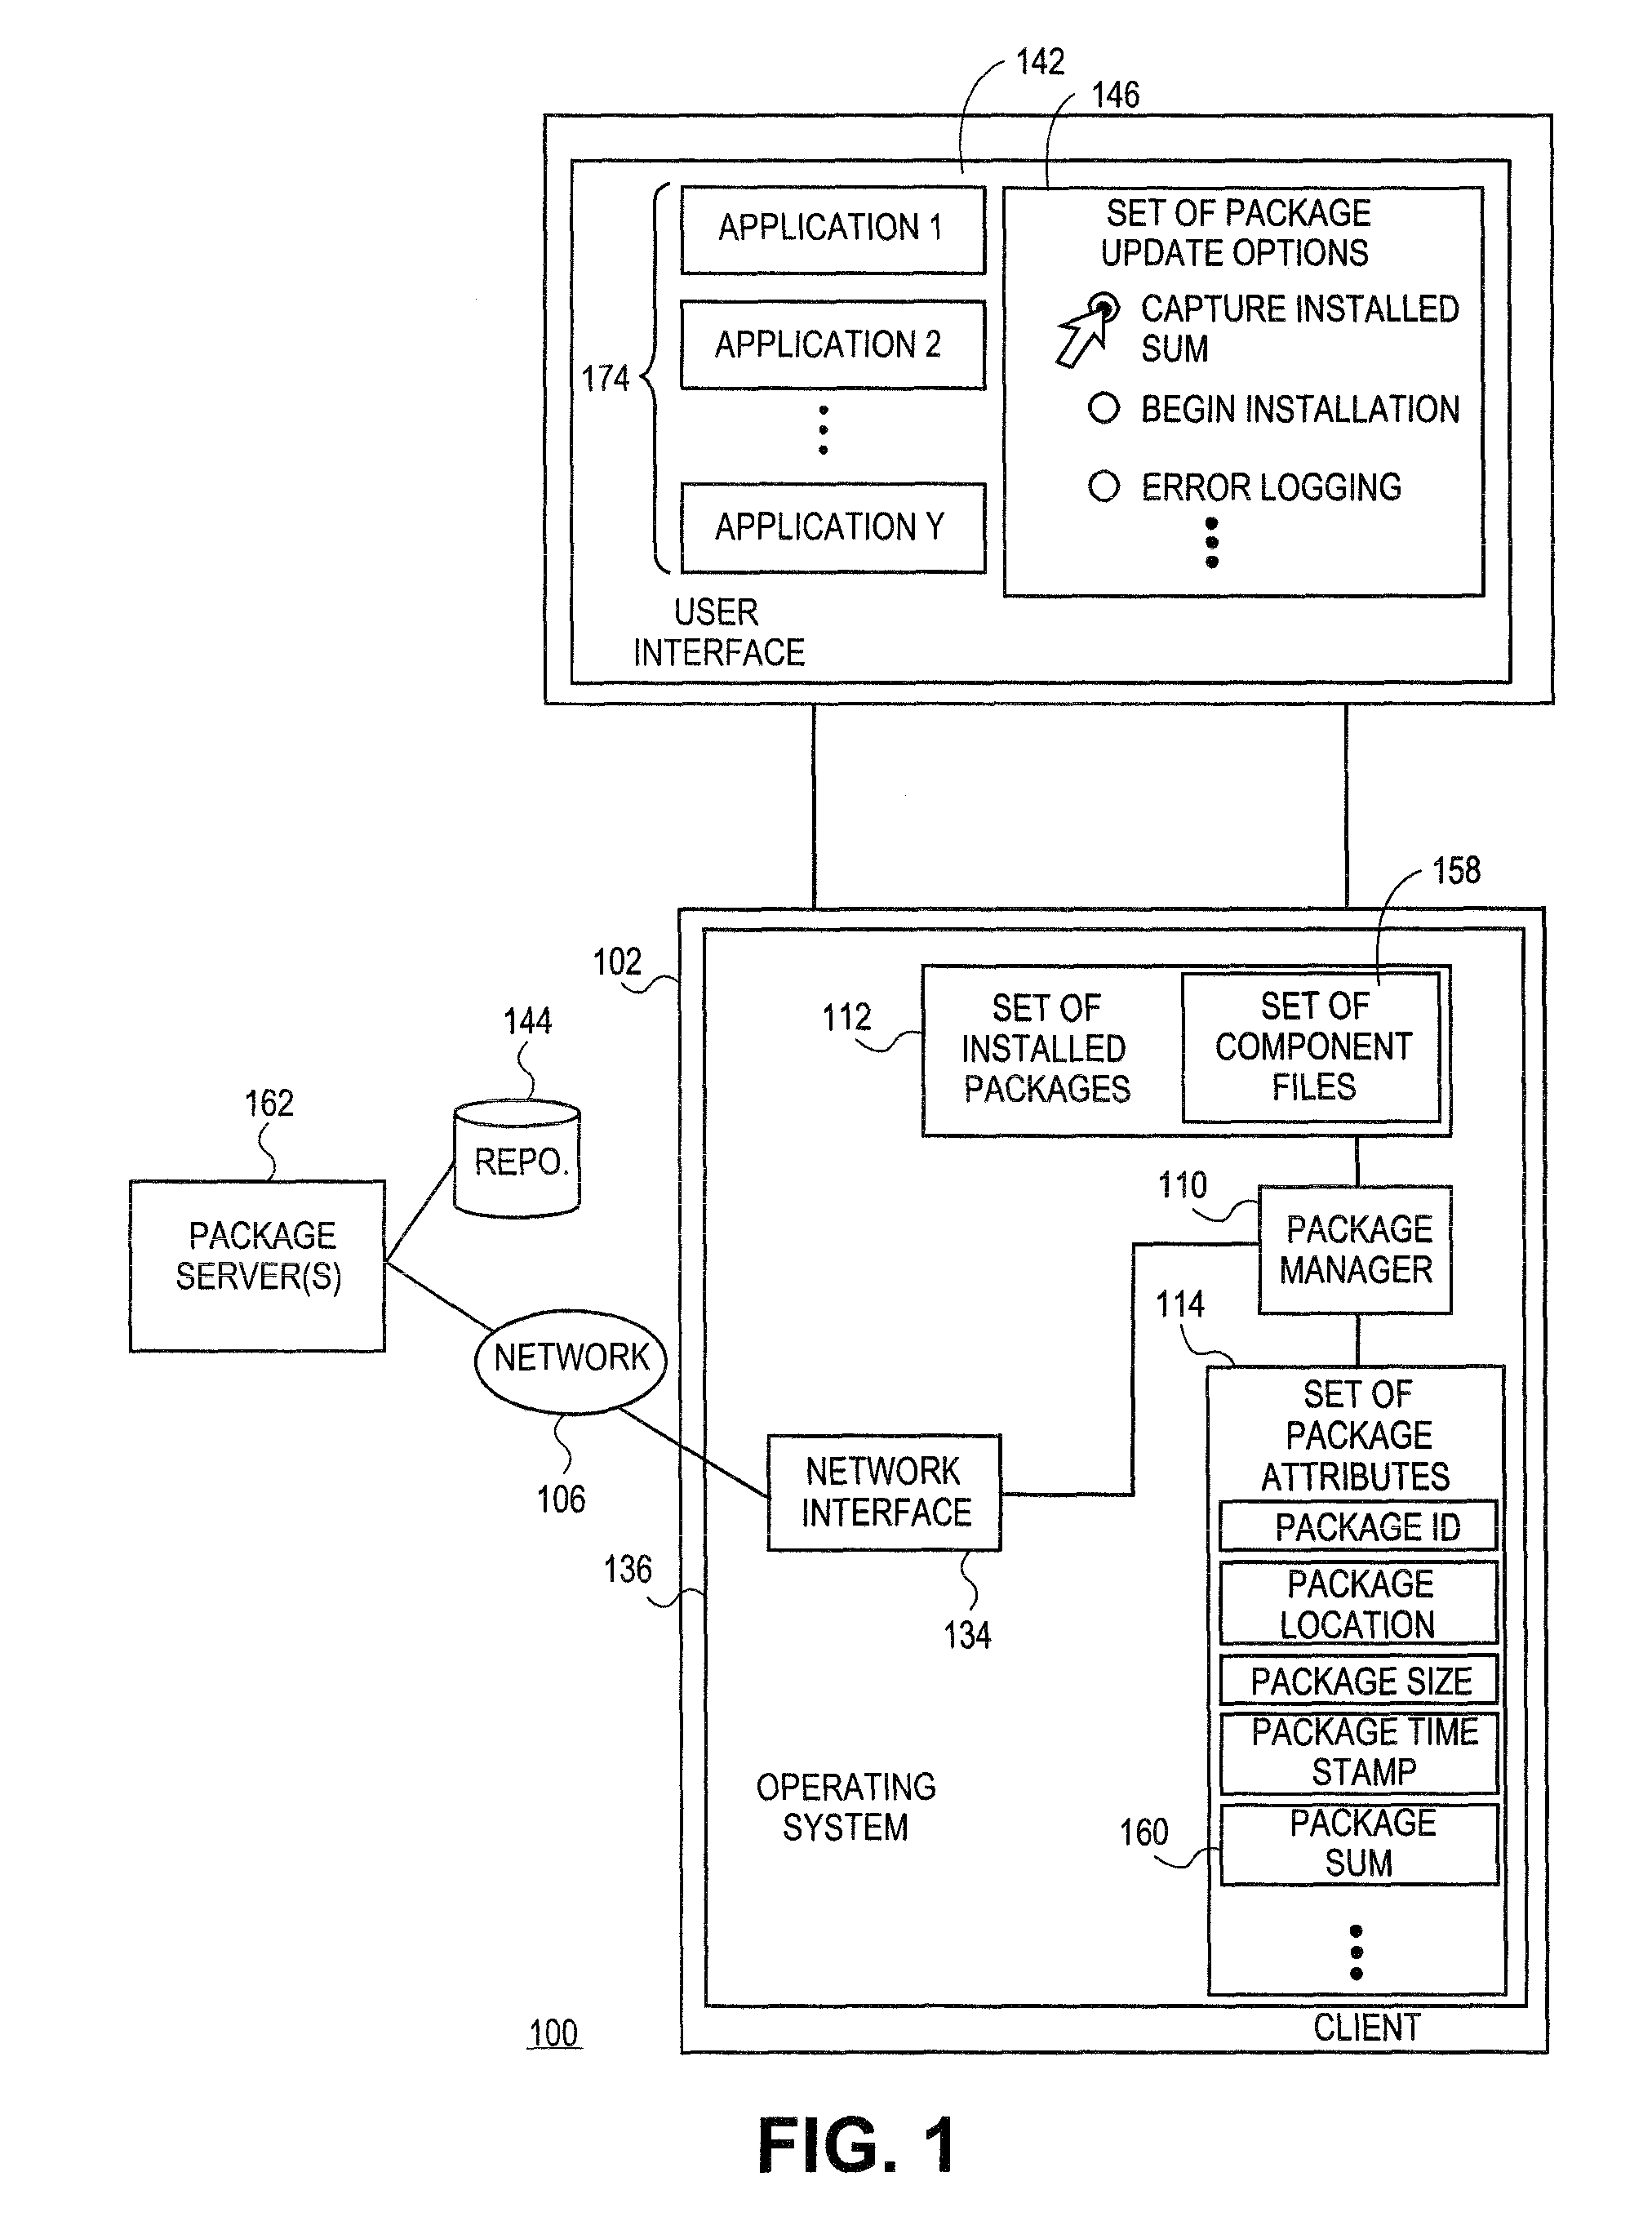 Systems and methods for generating machine state verification using number of installed package objects